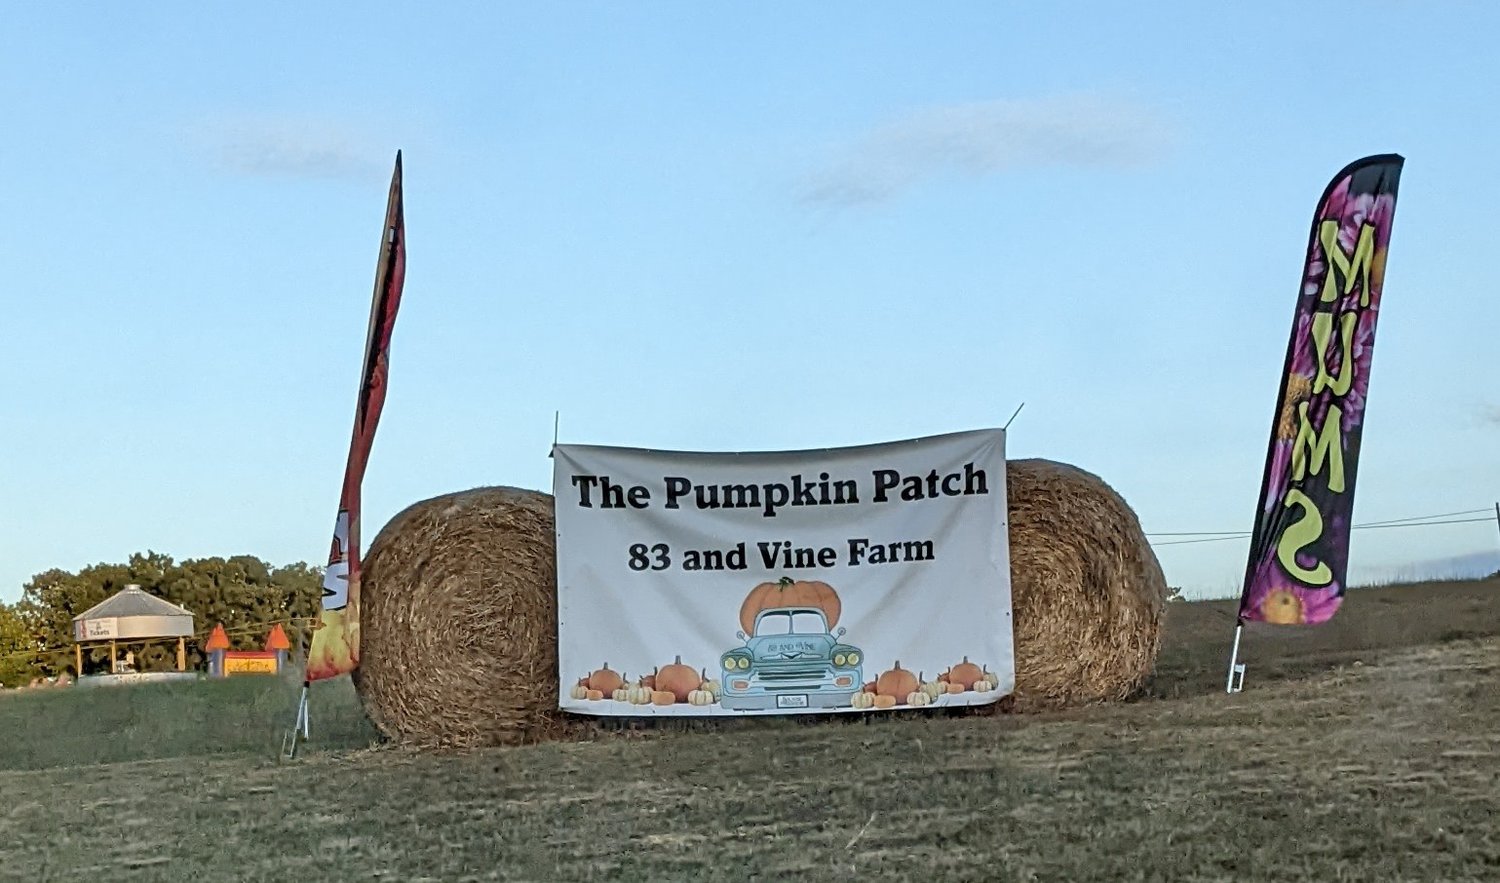 Kicking off their first year in operation, the Pumpkin Patch at 83 and Vine Farm welcomes the public to enjoy a variety of family-friendly attractions.